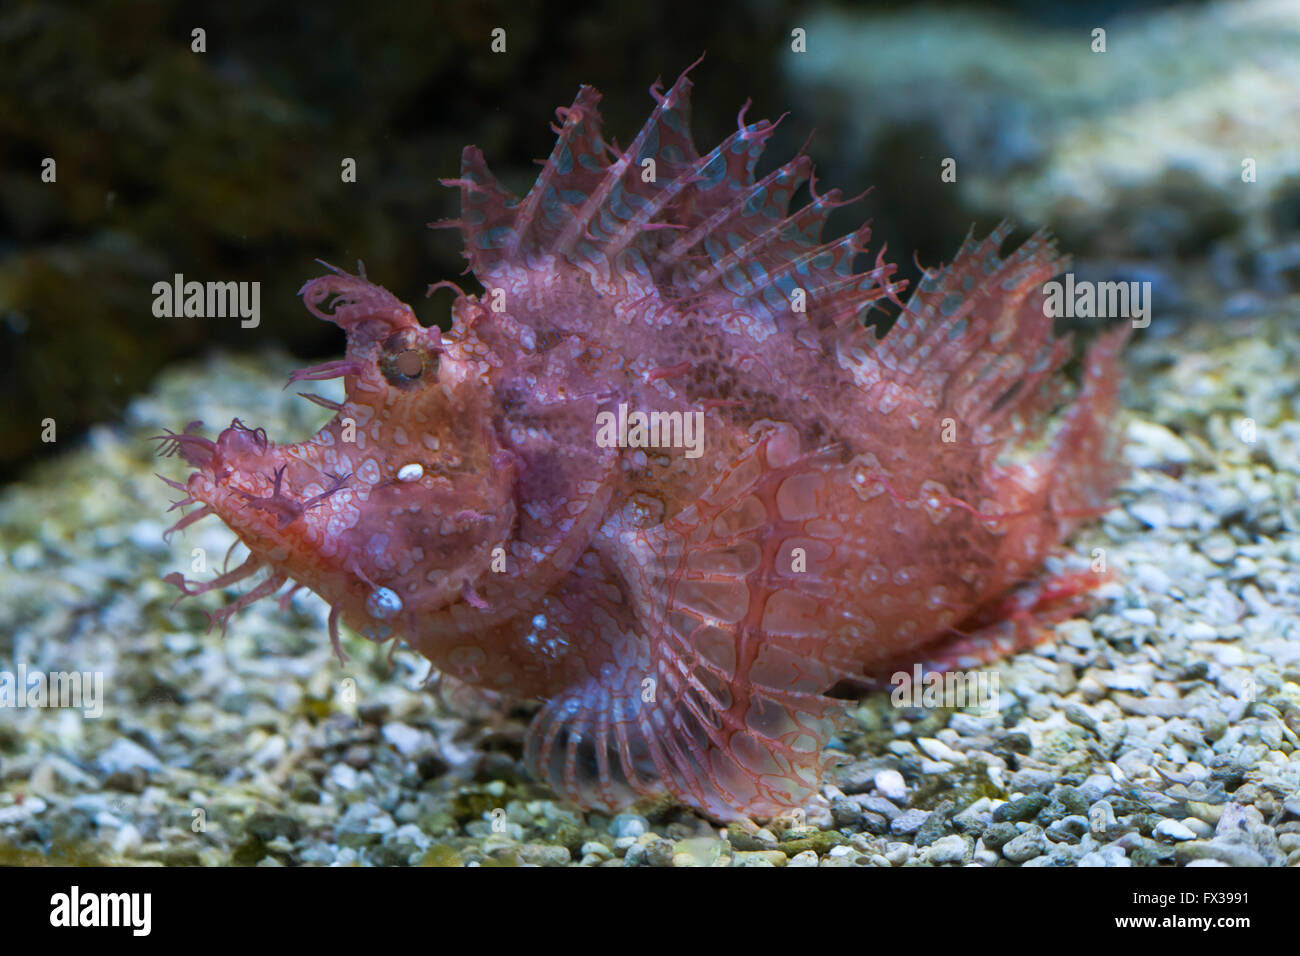 Weedy scorpionfish (Rhinopias frondosa), also known as the popeyed scorpionfish at Budapest Zoo in Budapest, Hungary. Stock Photo